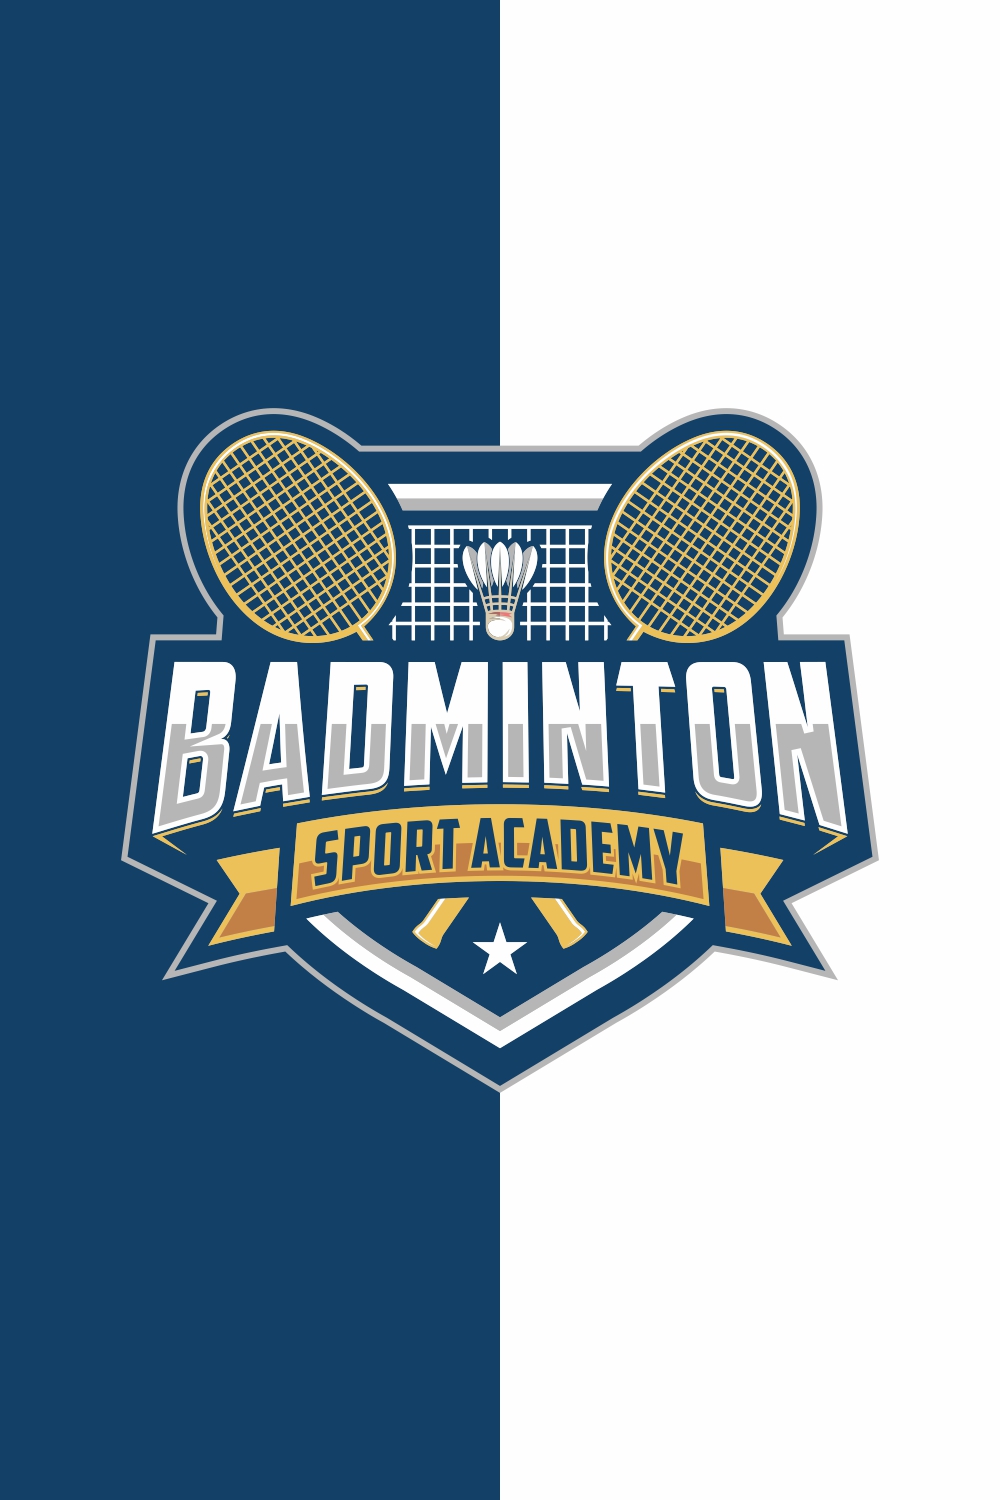 Badminton badge logo in modern minimalist style – Only $7 pinterest preview image.